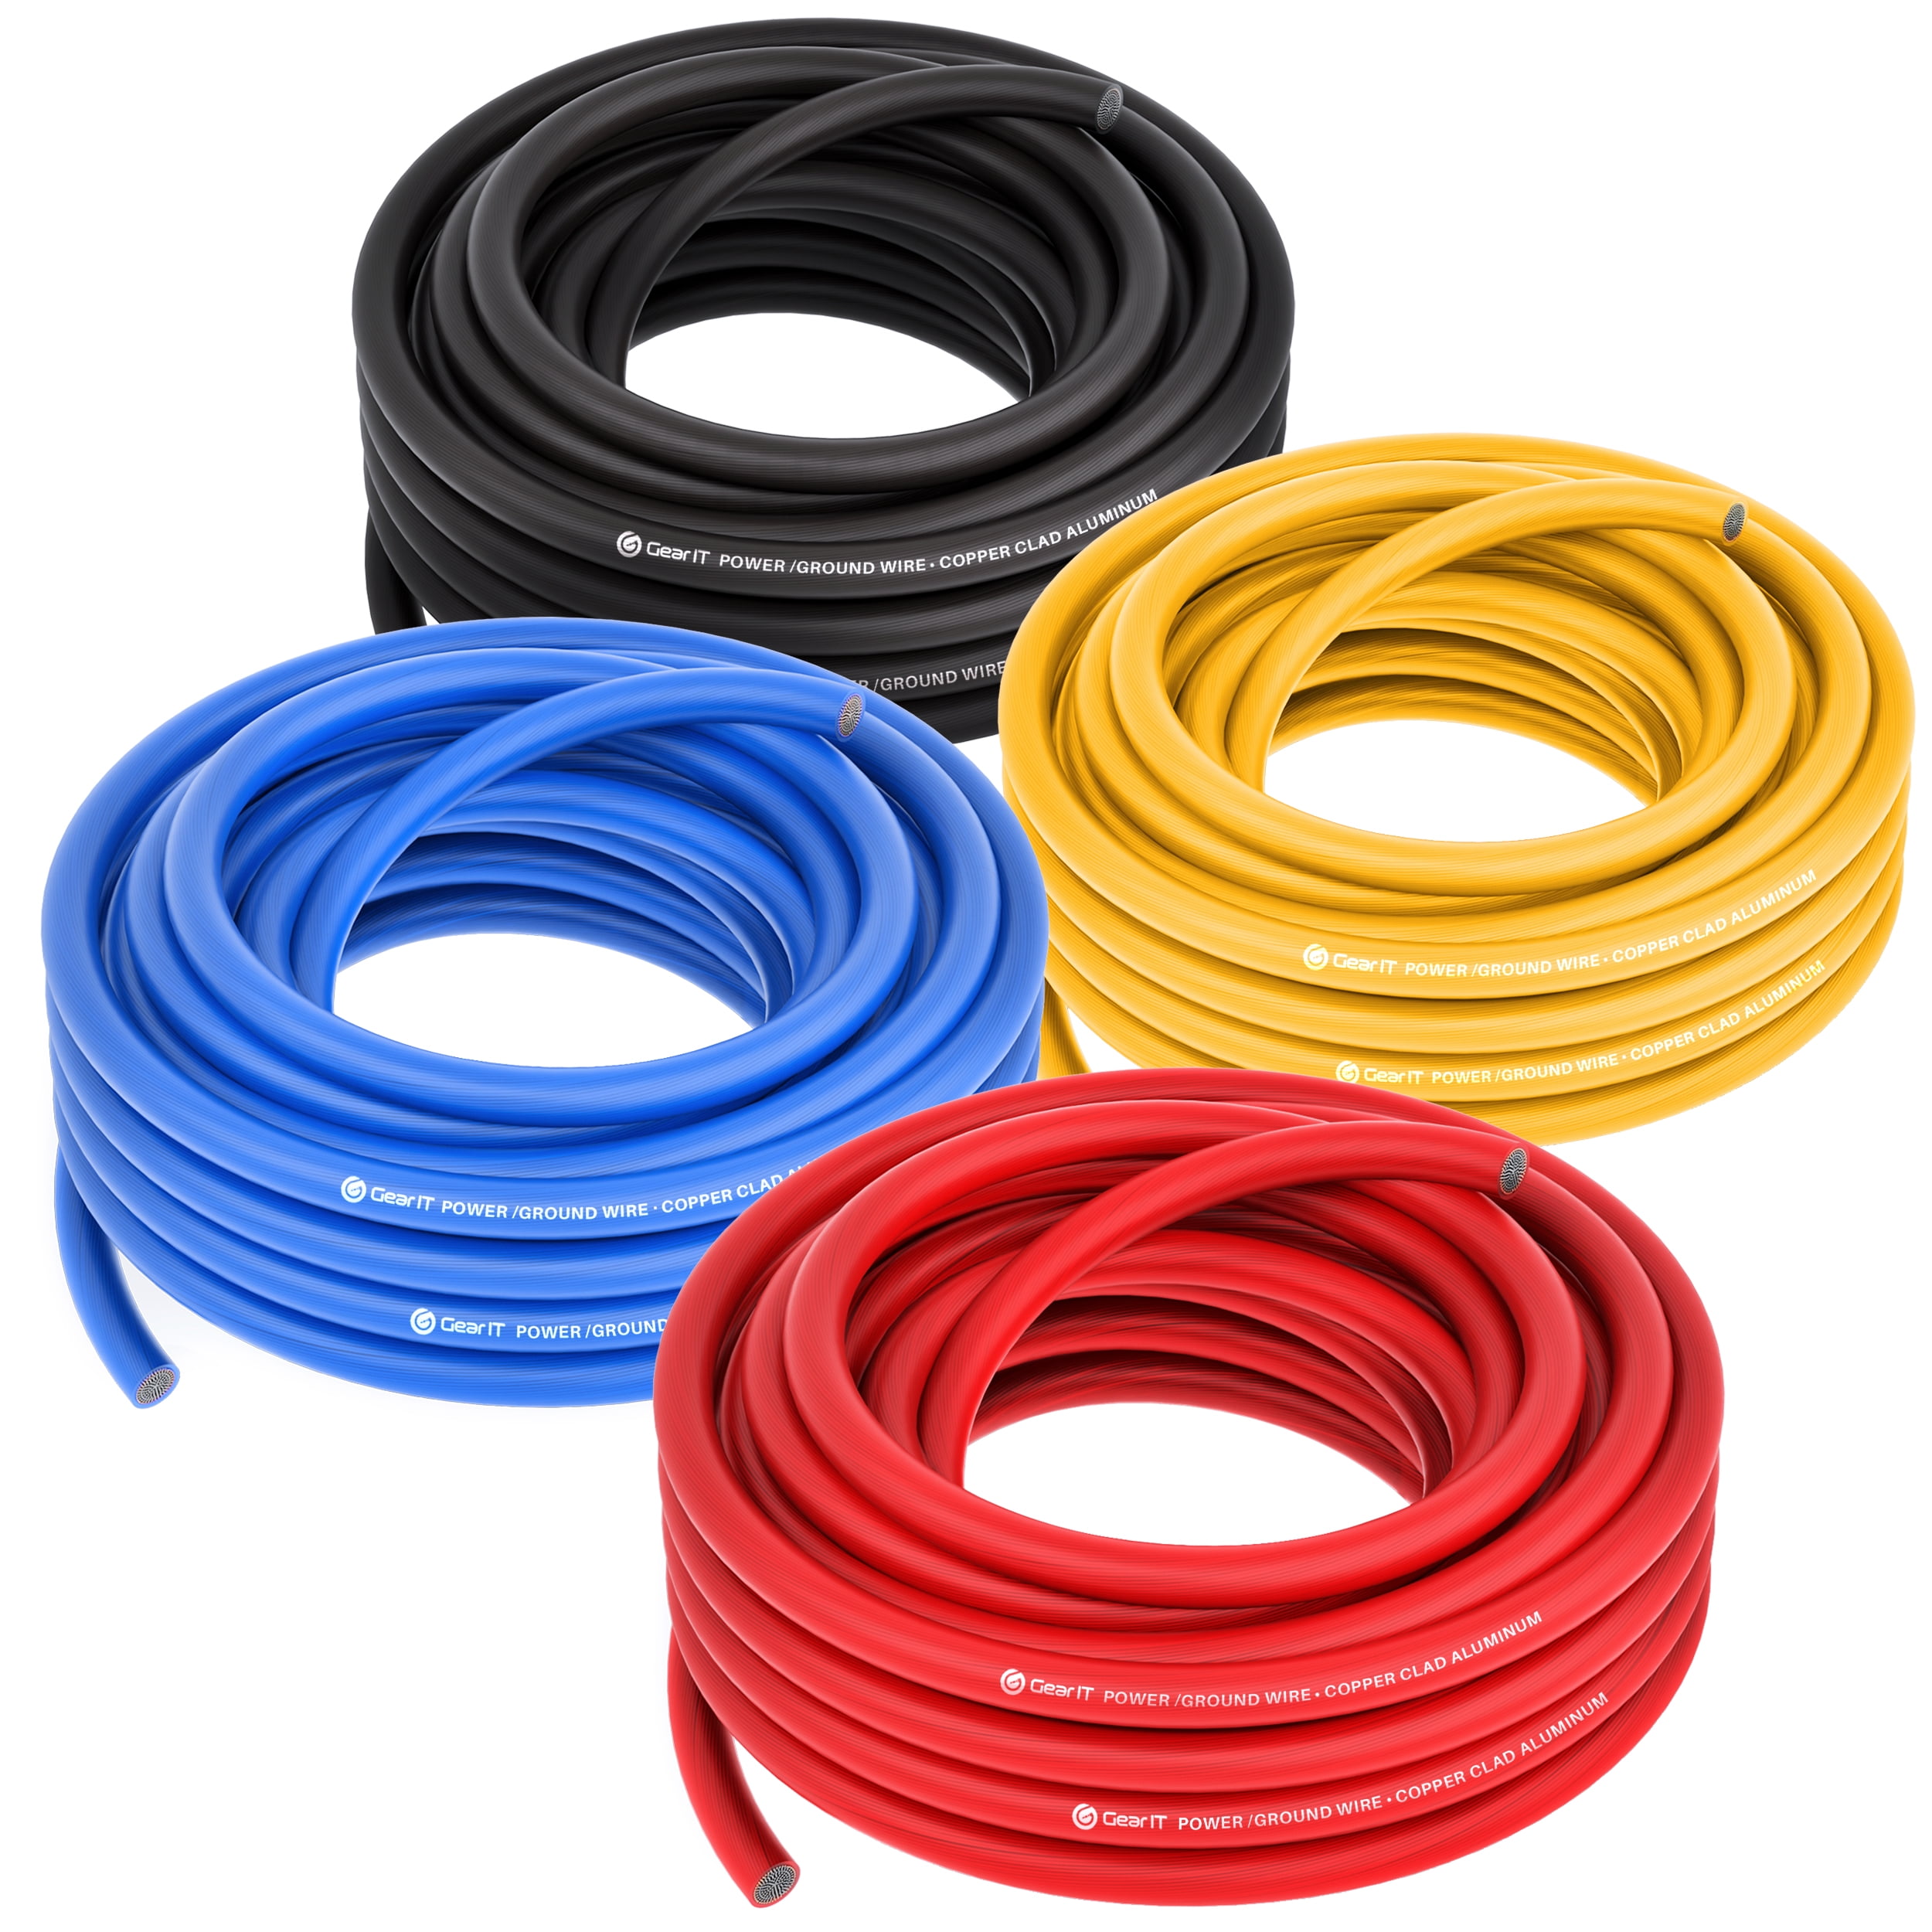 GCP Products GCP-US-578109 10 Gauge Wire (50Ft Each- Black/Red/Blue/Yellow)  Copper Clad Aluminum Cca - Primary Automotive Power/Ground Battery Cable,  Ca…